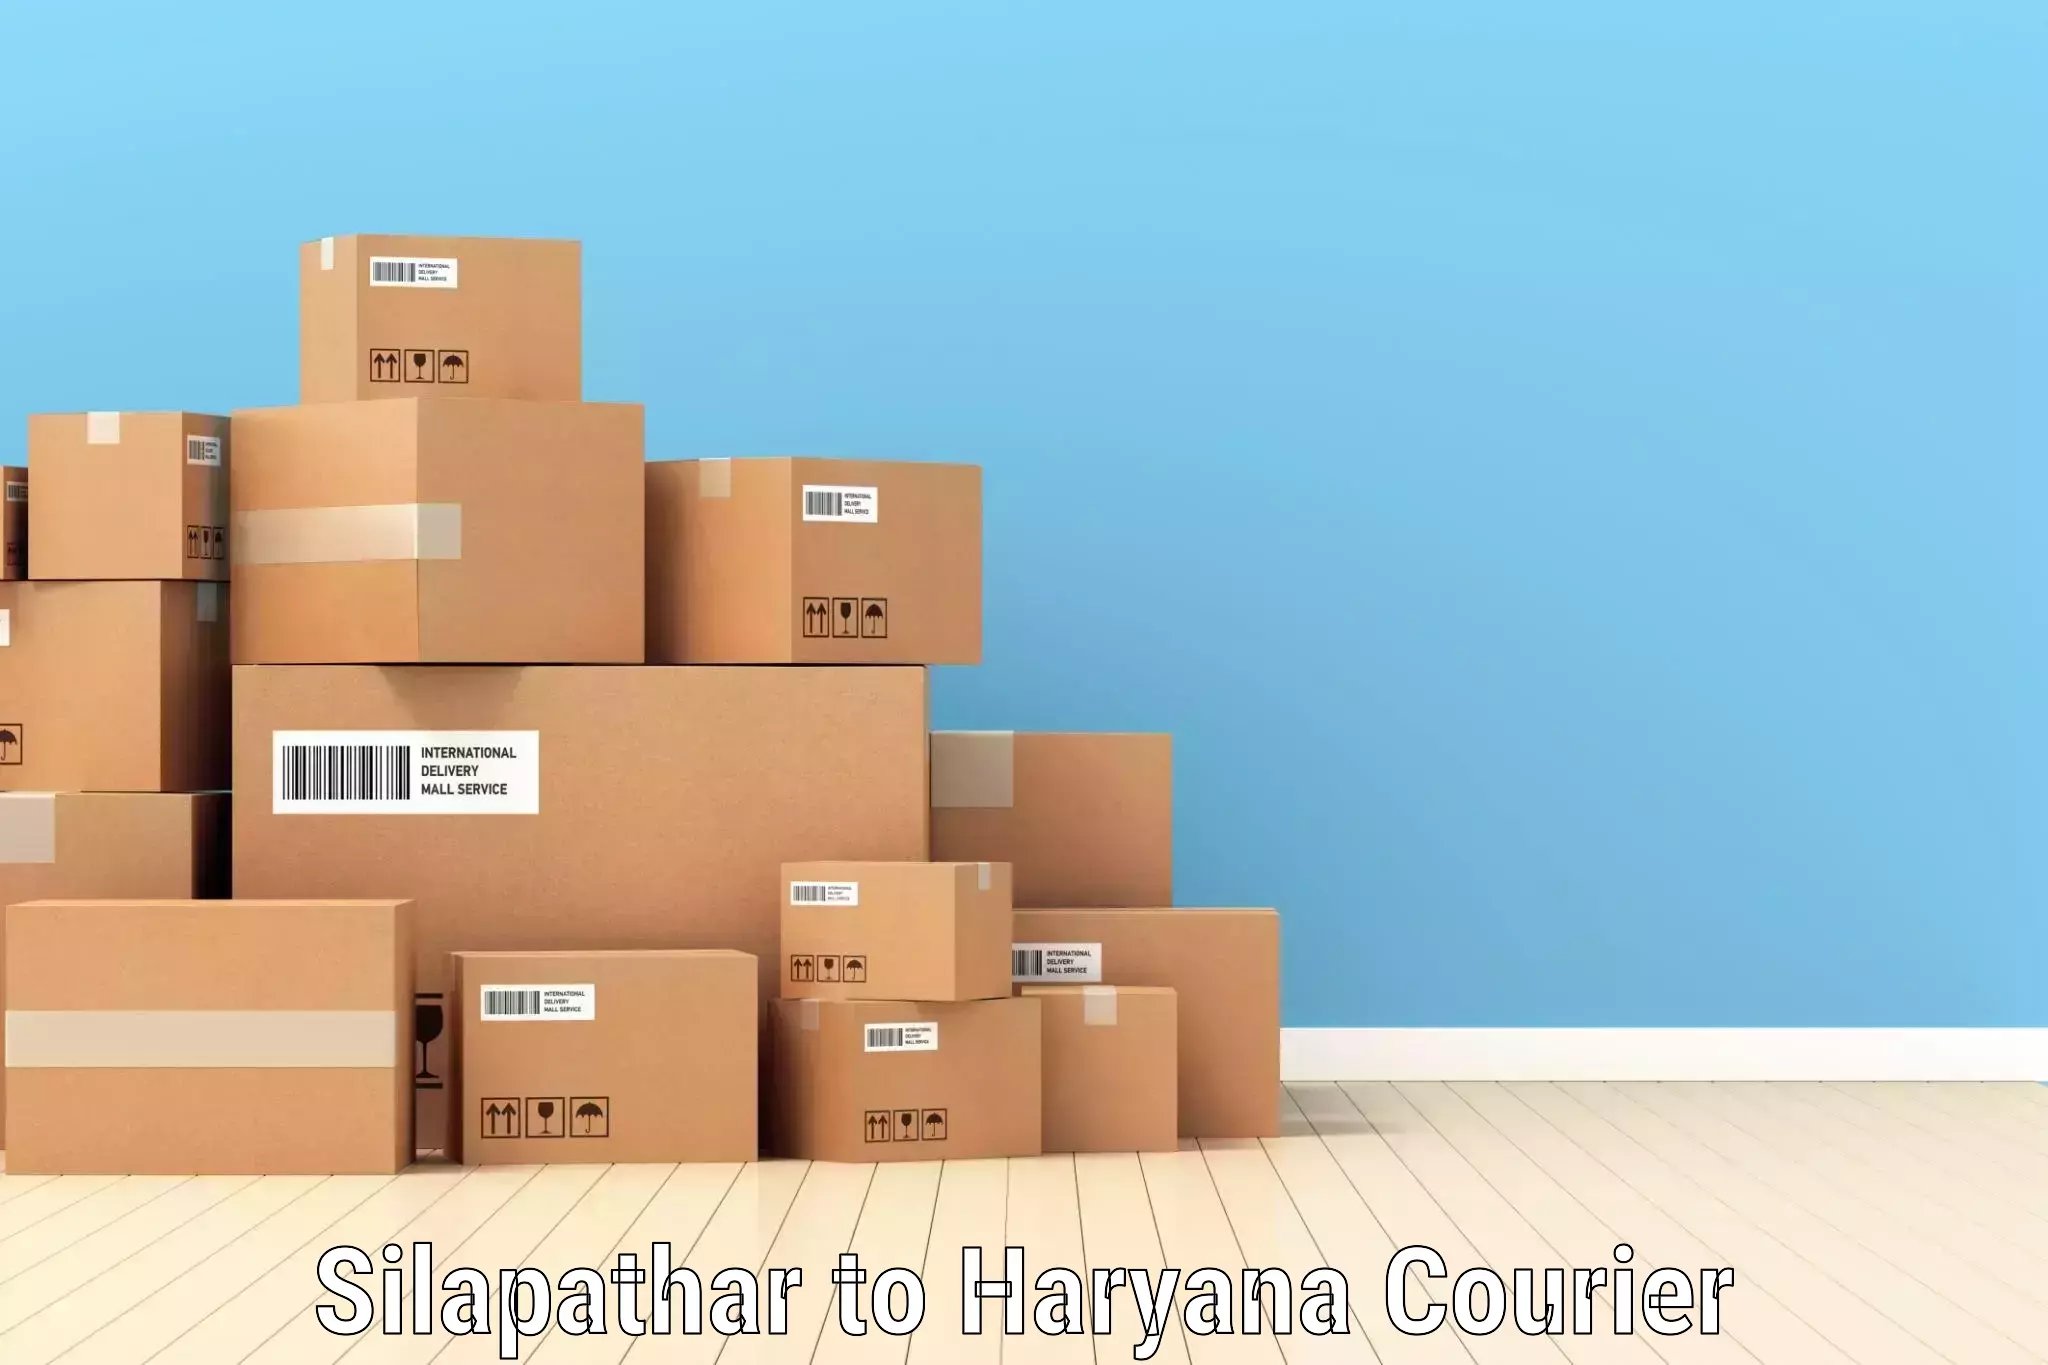 State-of-the-art courier technology Silapathar to NCR Haryana